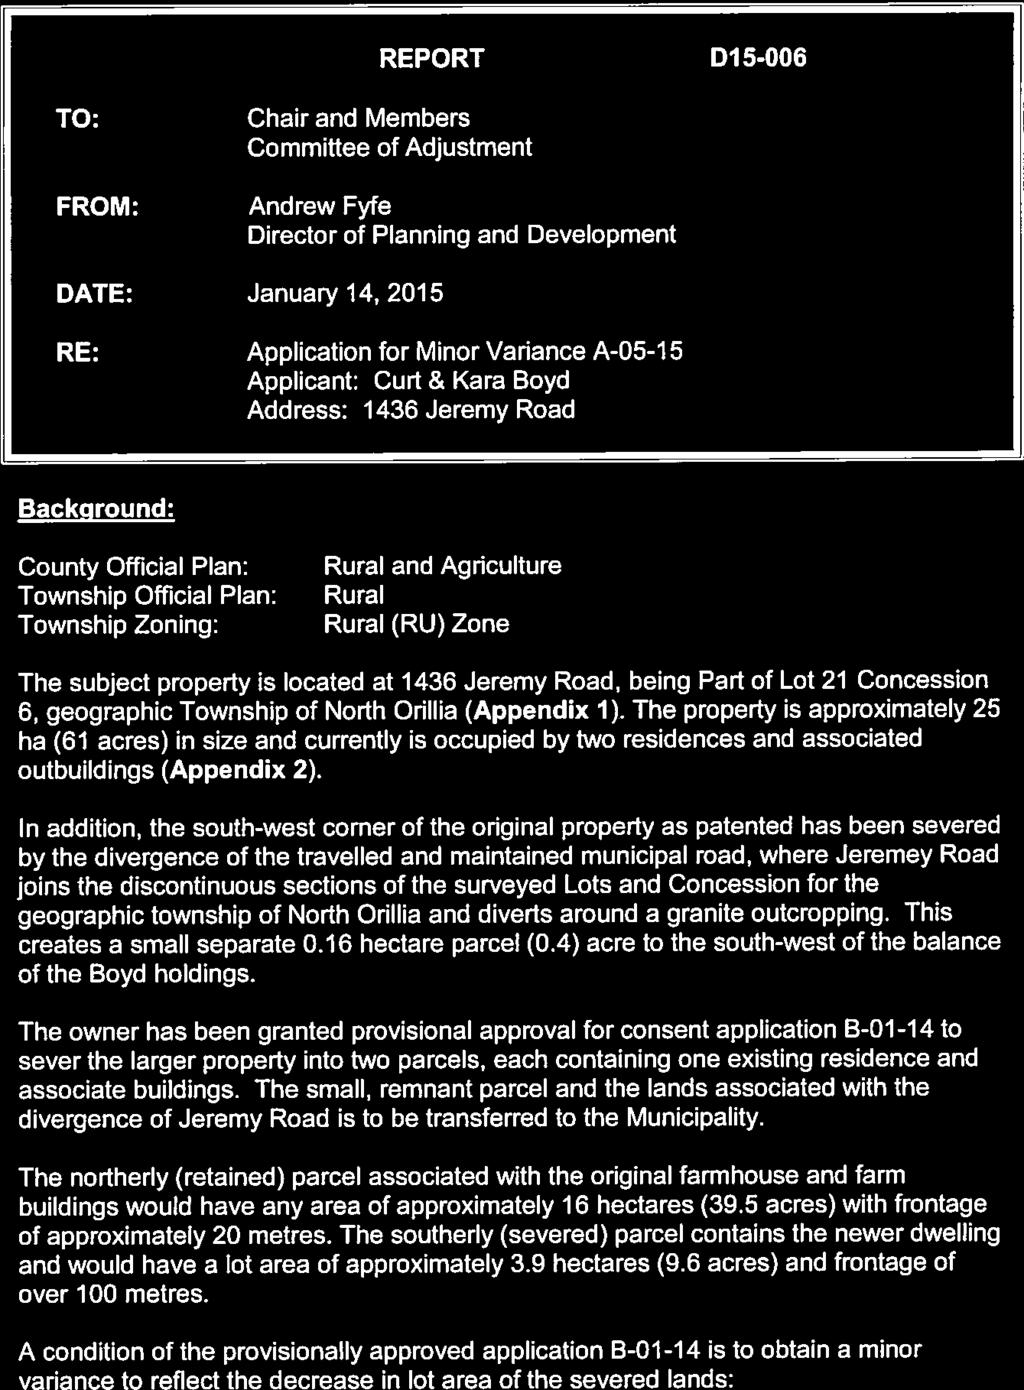 D-6 REPORT Dl 5-006 TO: FROM: Chair and Members Committee of Adjustment Andrew Fyfe Director of Planning and Development DATE: January 14, 2015 RE: Application for Minor Variance A-05-15 Applicant: